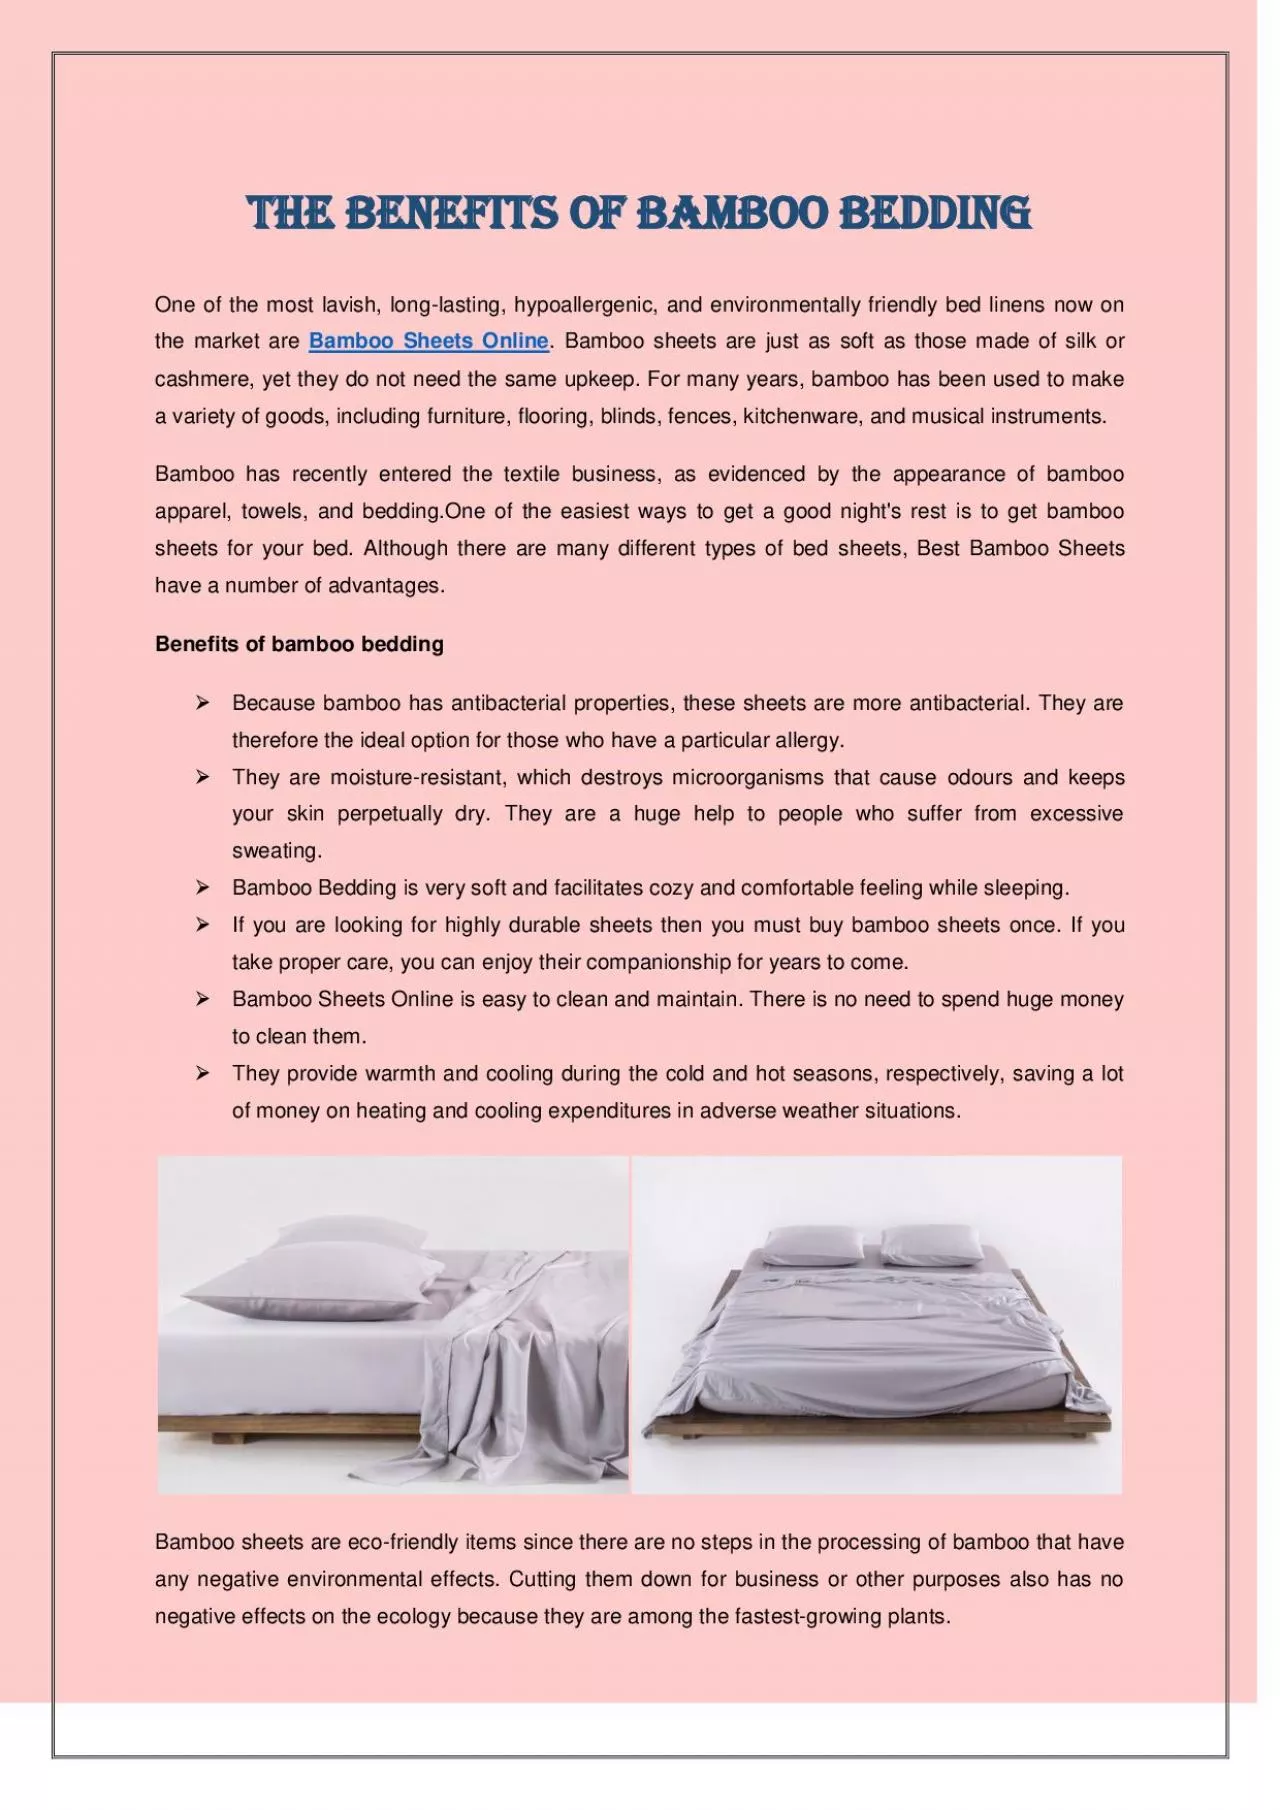 The Benefits of Bamboo Bedding